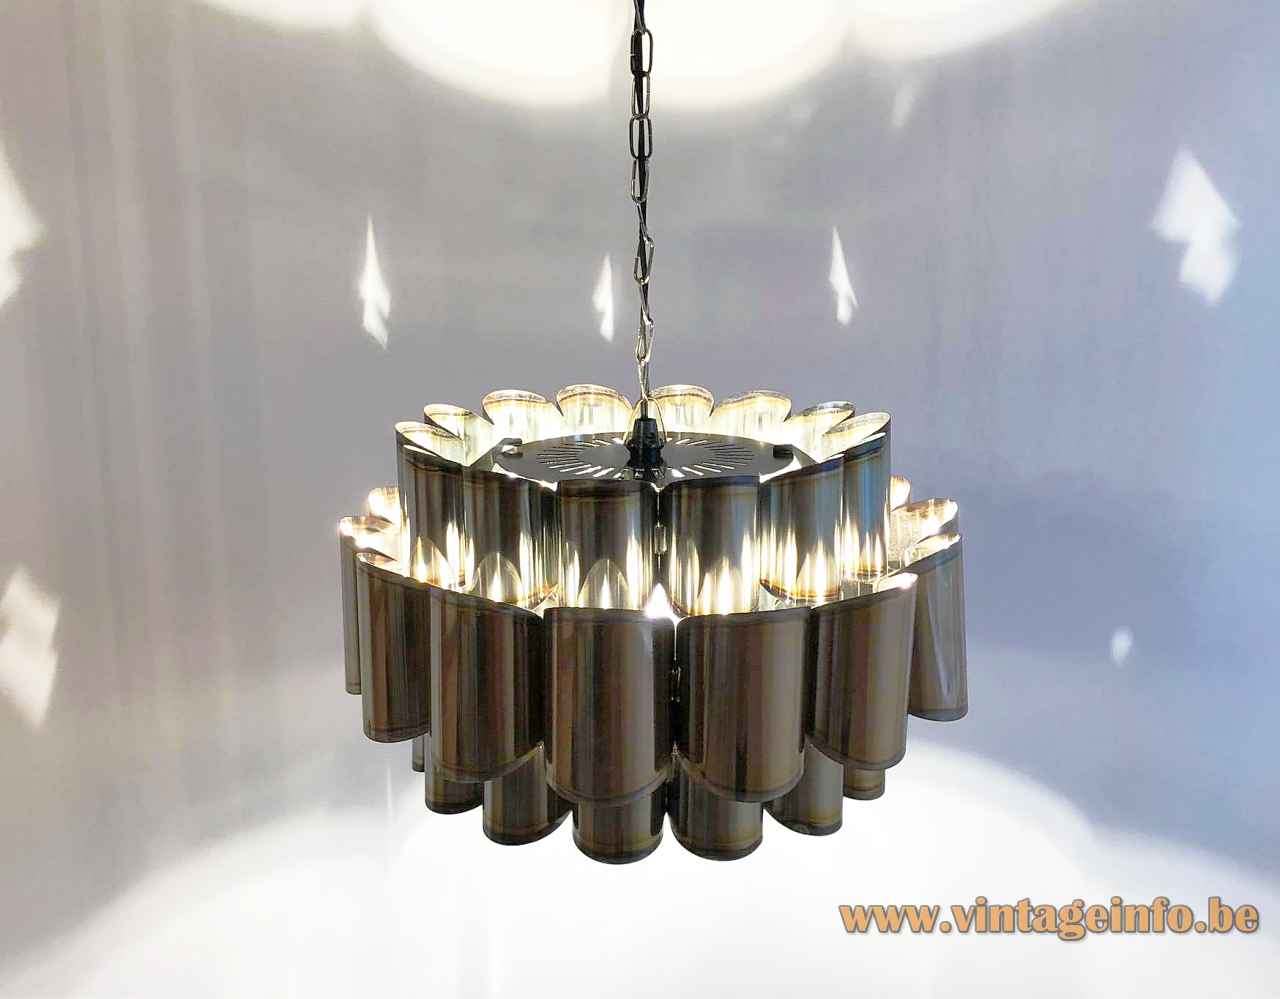 Coronell Elektro stainless steel pendant lamp curved metal slats lampshade chain 1960s 1970s Germany E27 socket